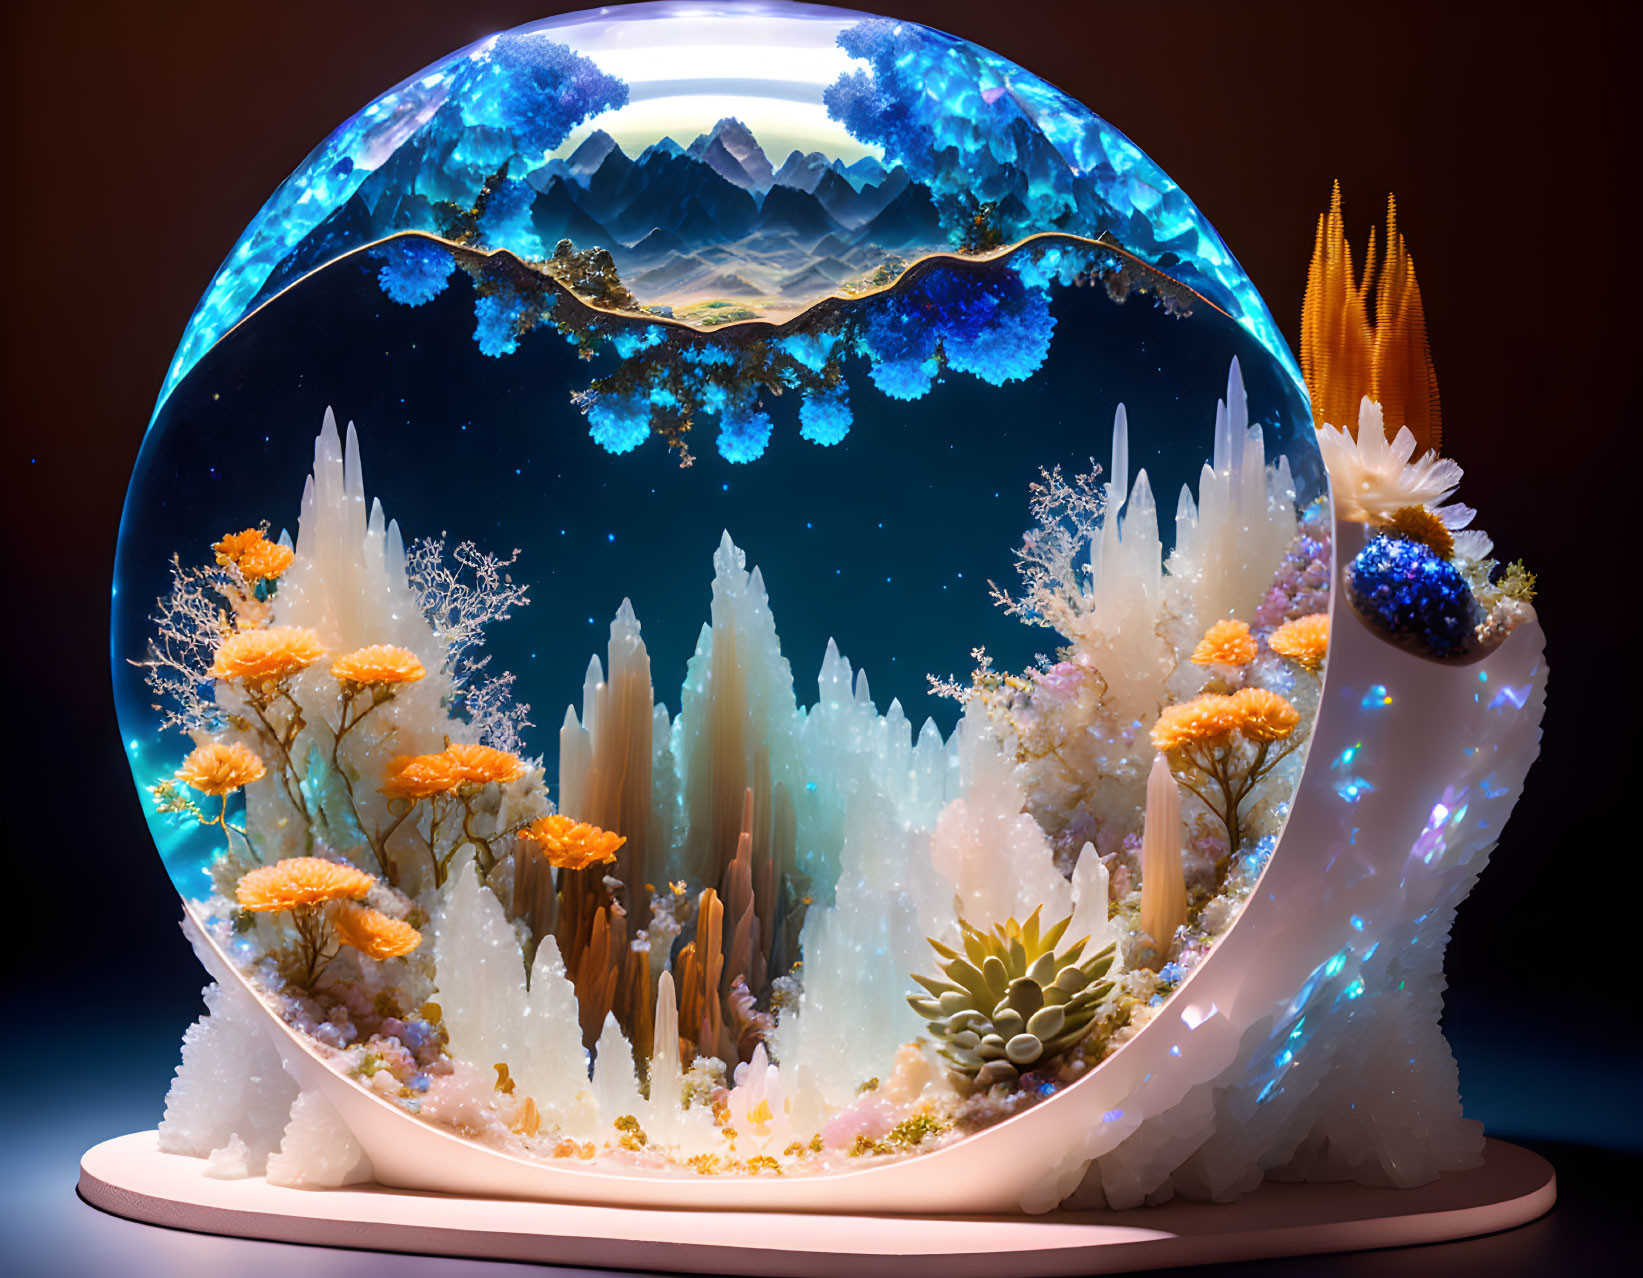 Colorful Crystal Terrarium with Underwater Mountain Landscape